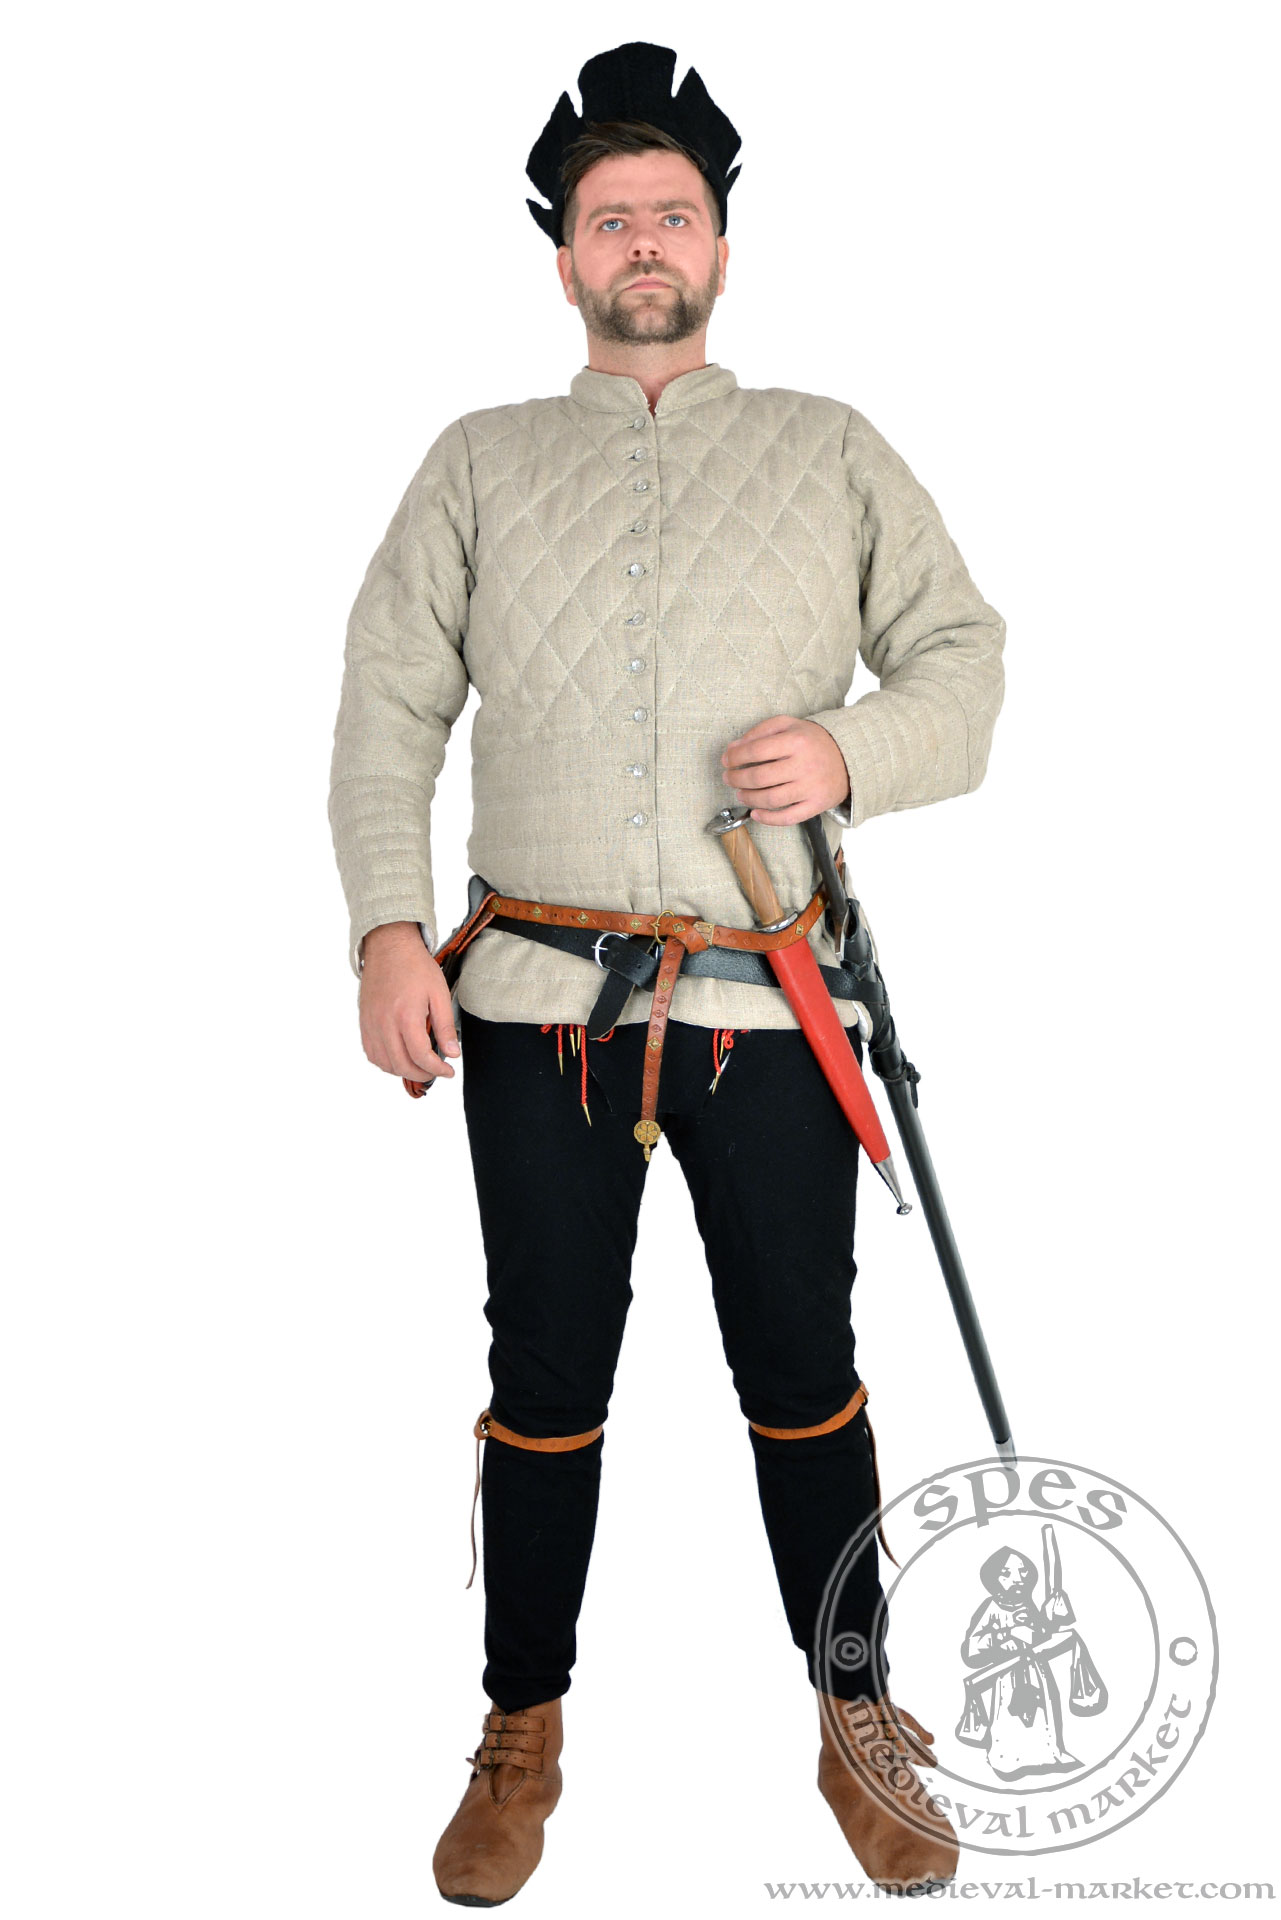 Details about   Dragoon Gambeson Arming Shirt Padded Armor Wear Medieval Renaissance Sleeveless 